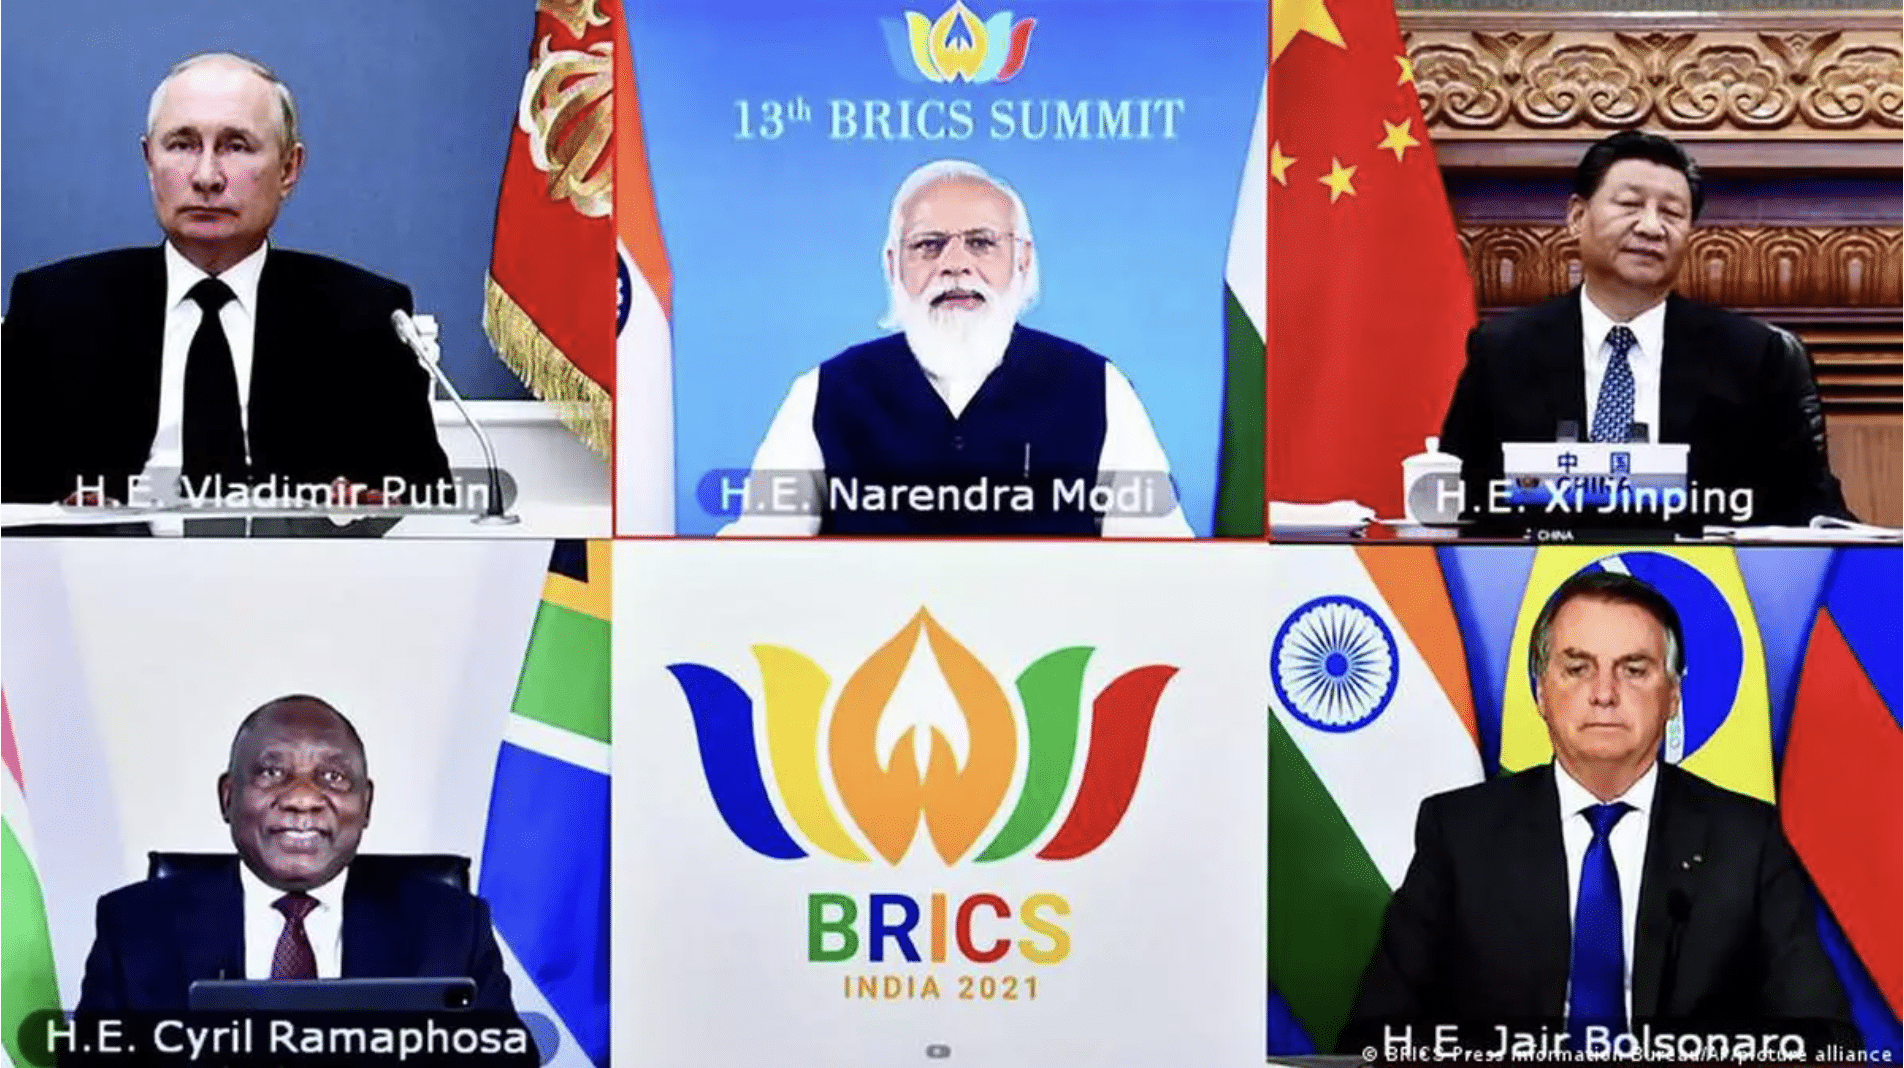 BRICS nations offer a “New World Order” as alternative to the West